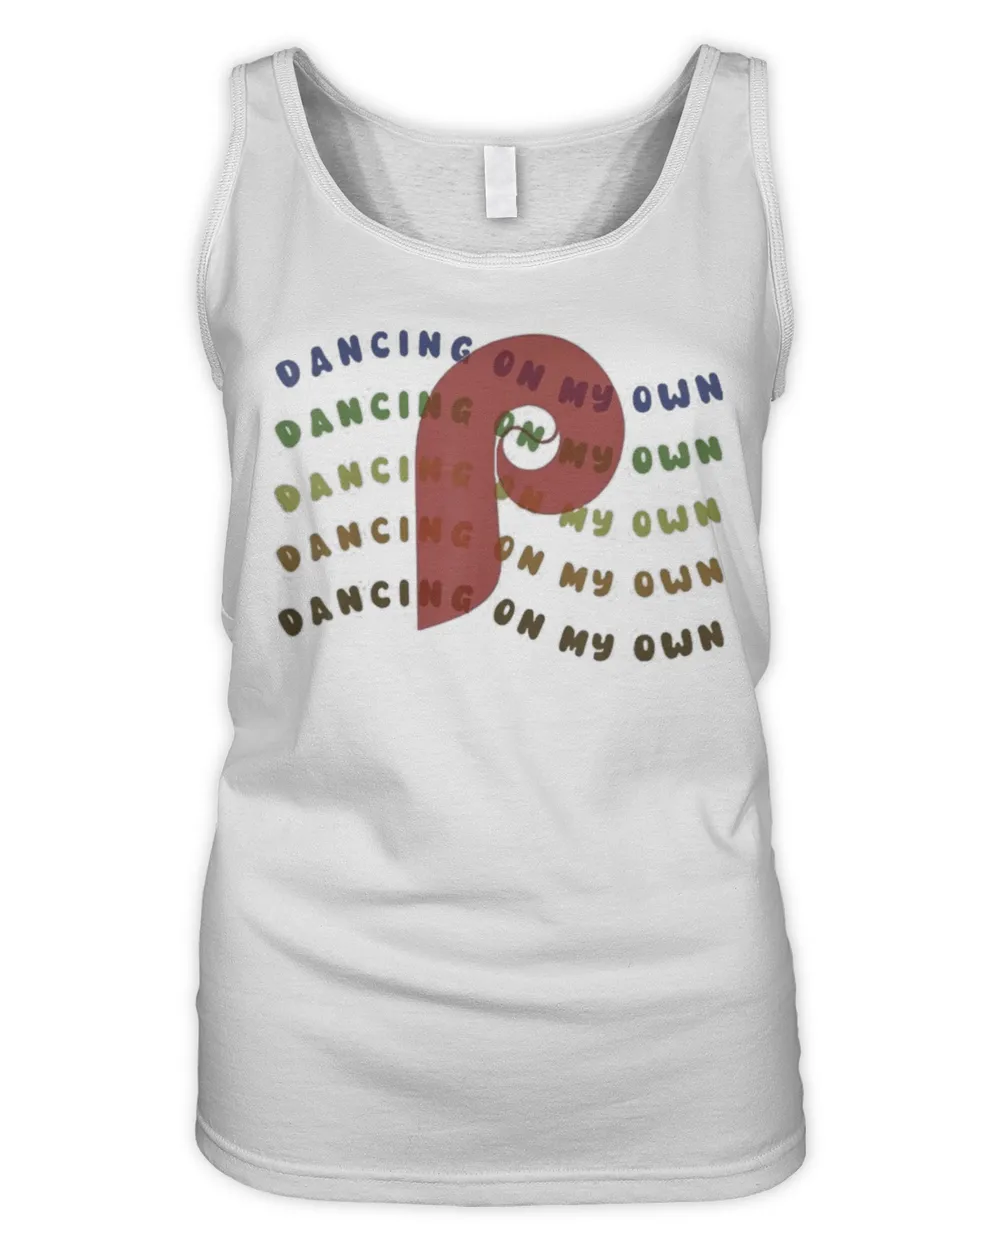 Philly Dancing on My Own Philadelphia Unisex Shirts